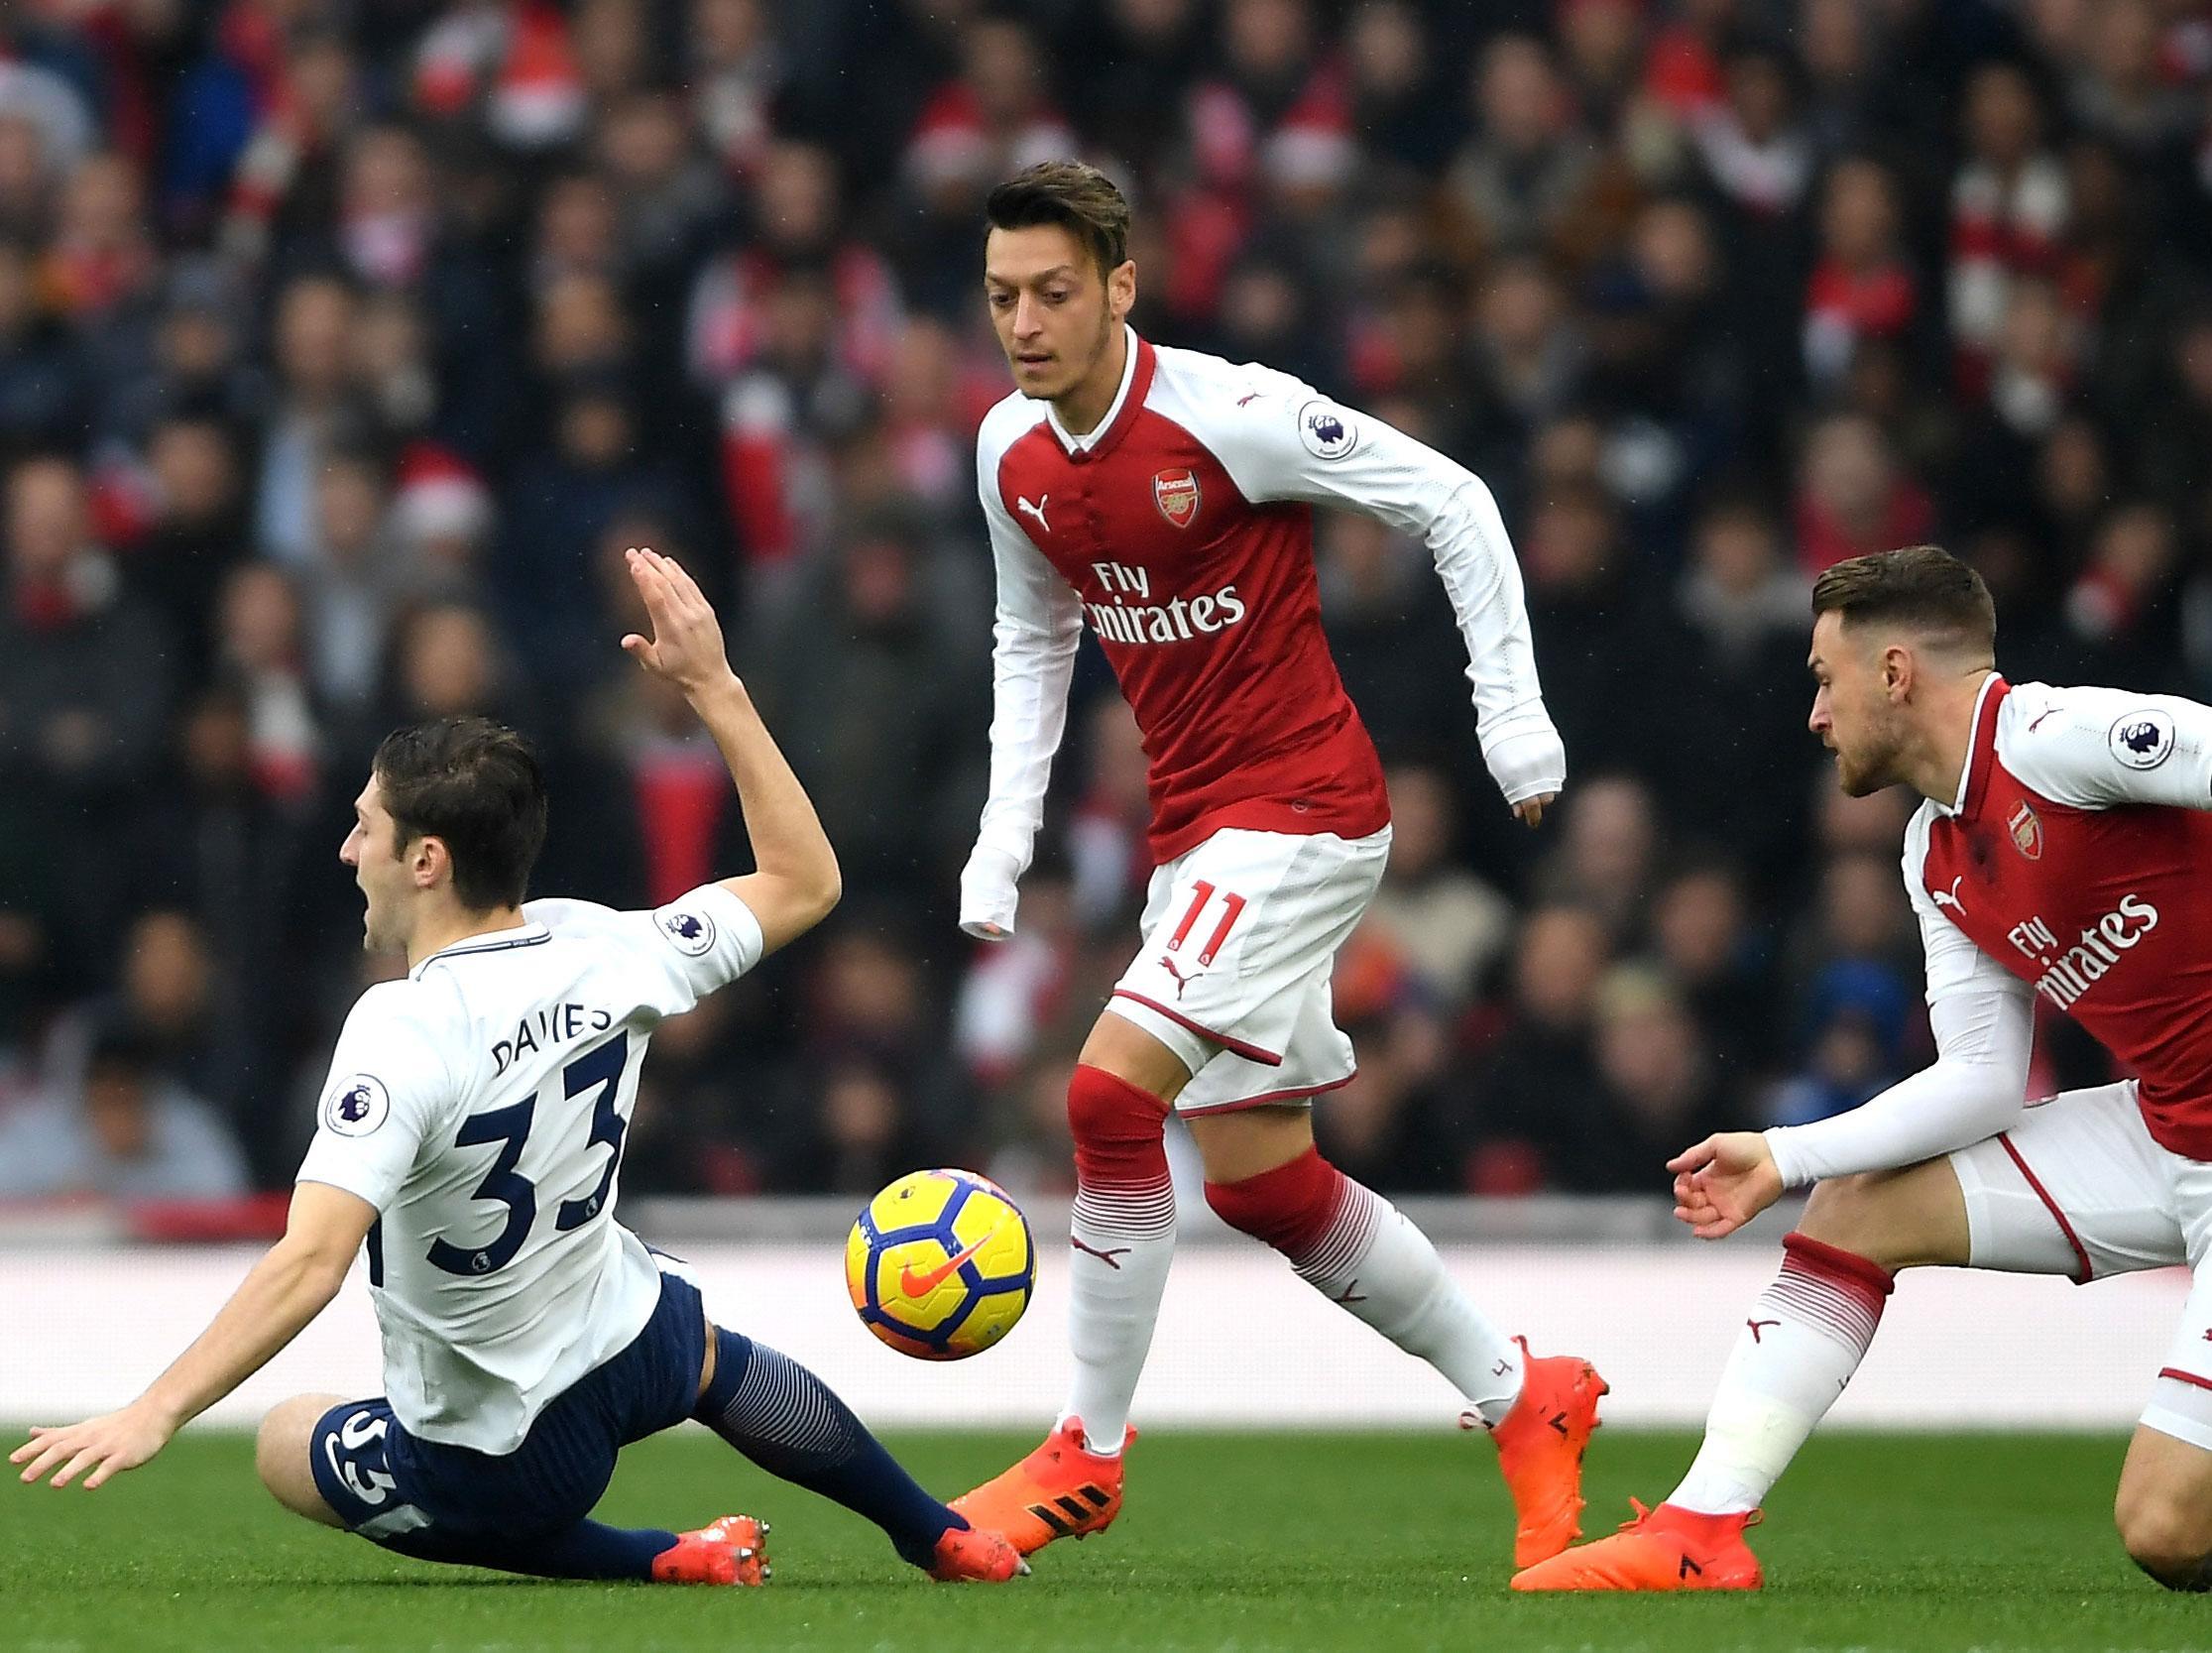 Ozil and Sanchez both played brilliantly as Arsenal dominated Spurs